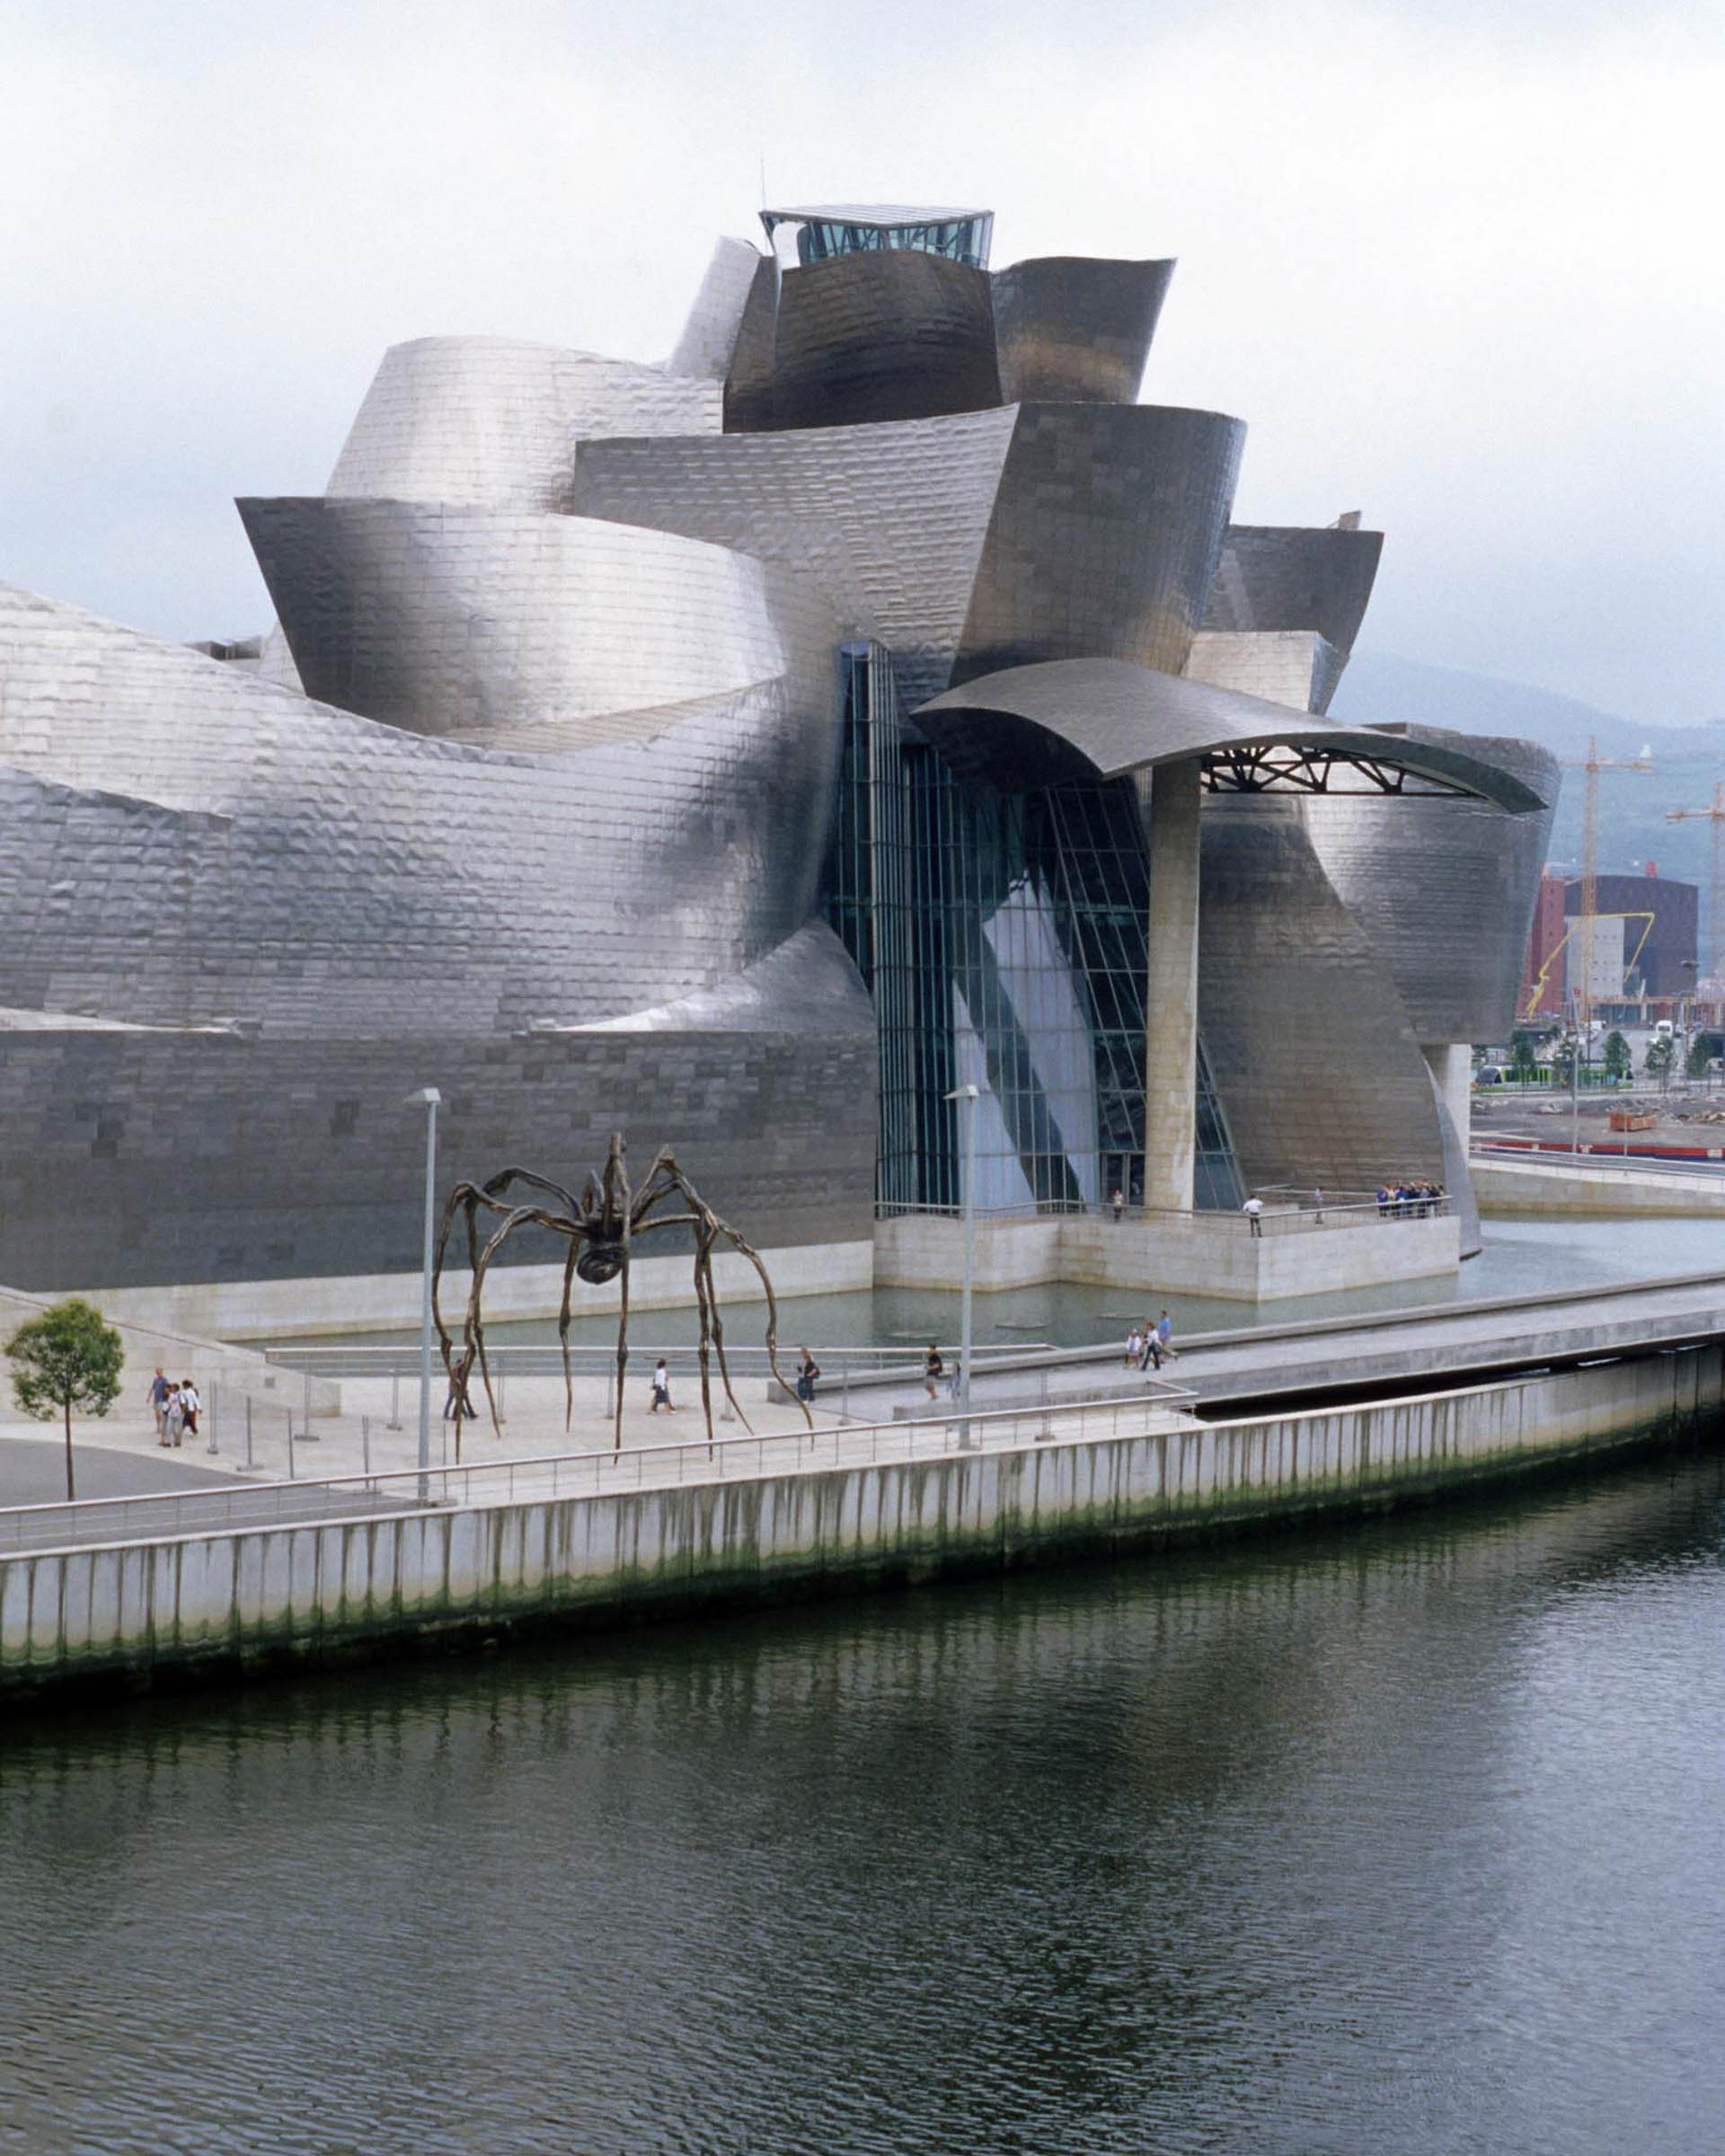 List 97+ Images a guggenheim museum designed by frank gehry is located in which city? Excellent